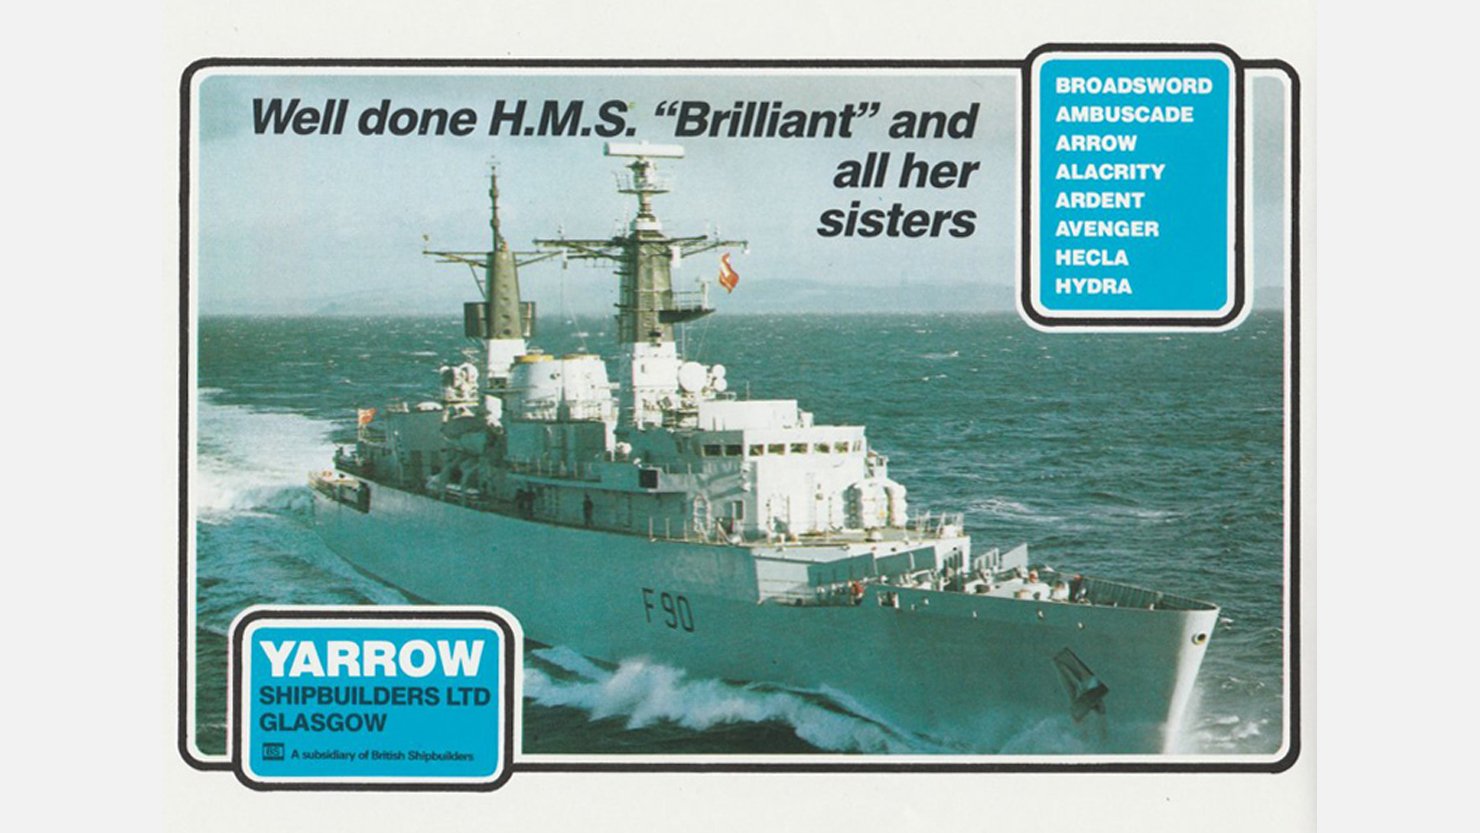 Falklands War booklet from The Box's collections